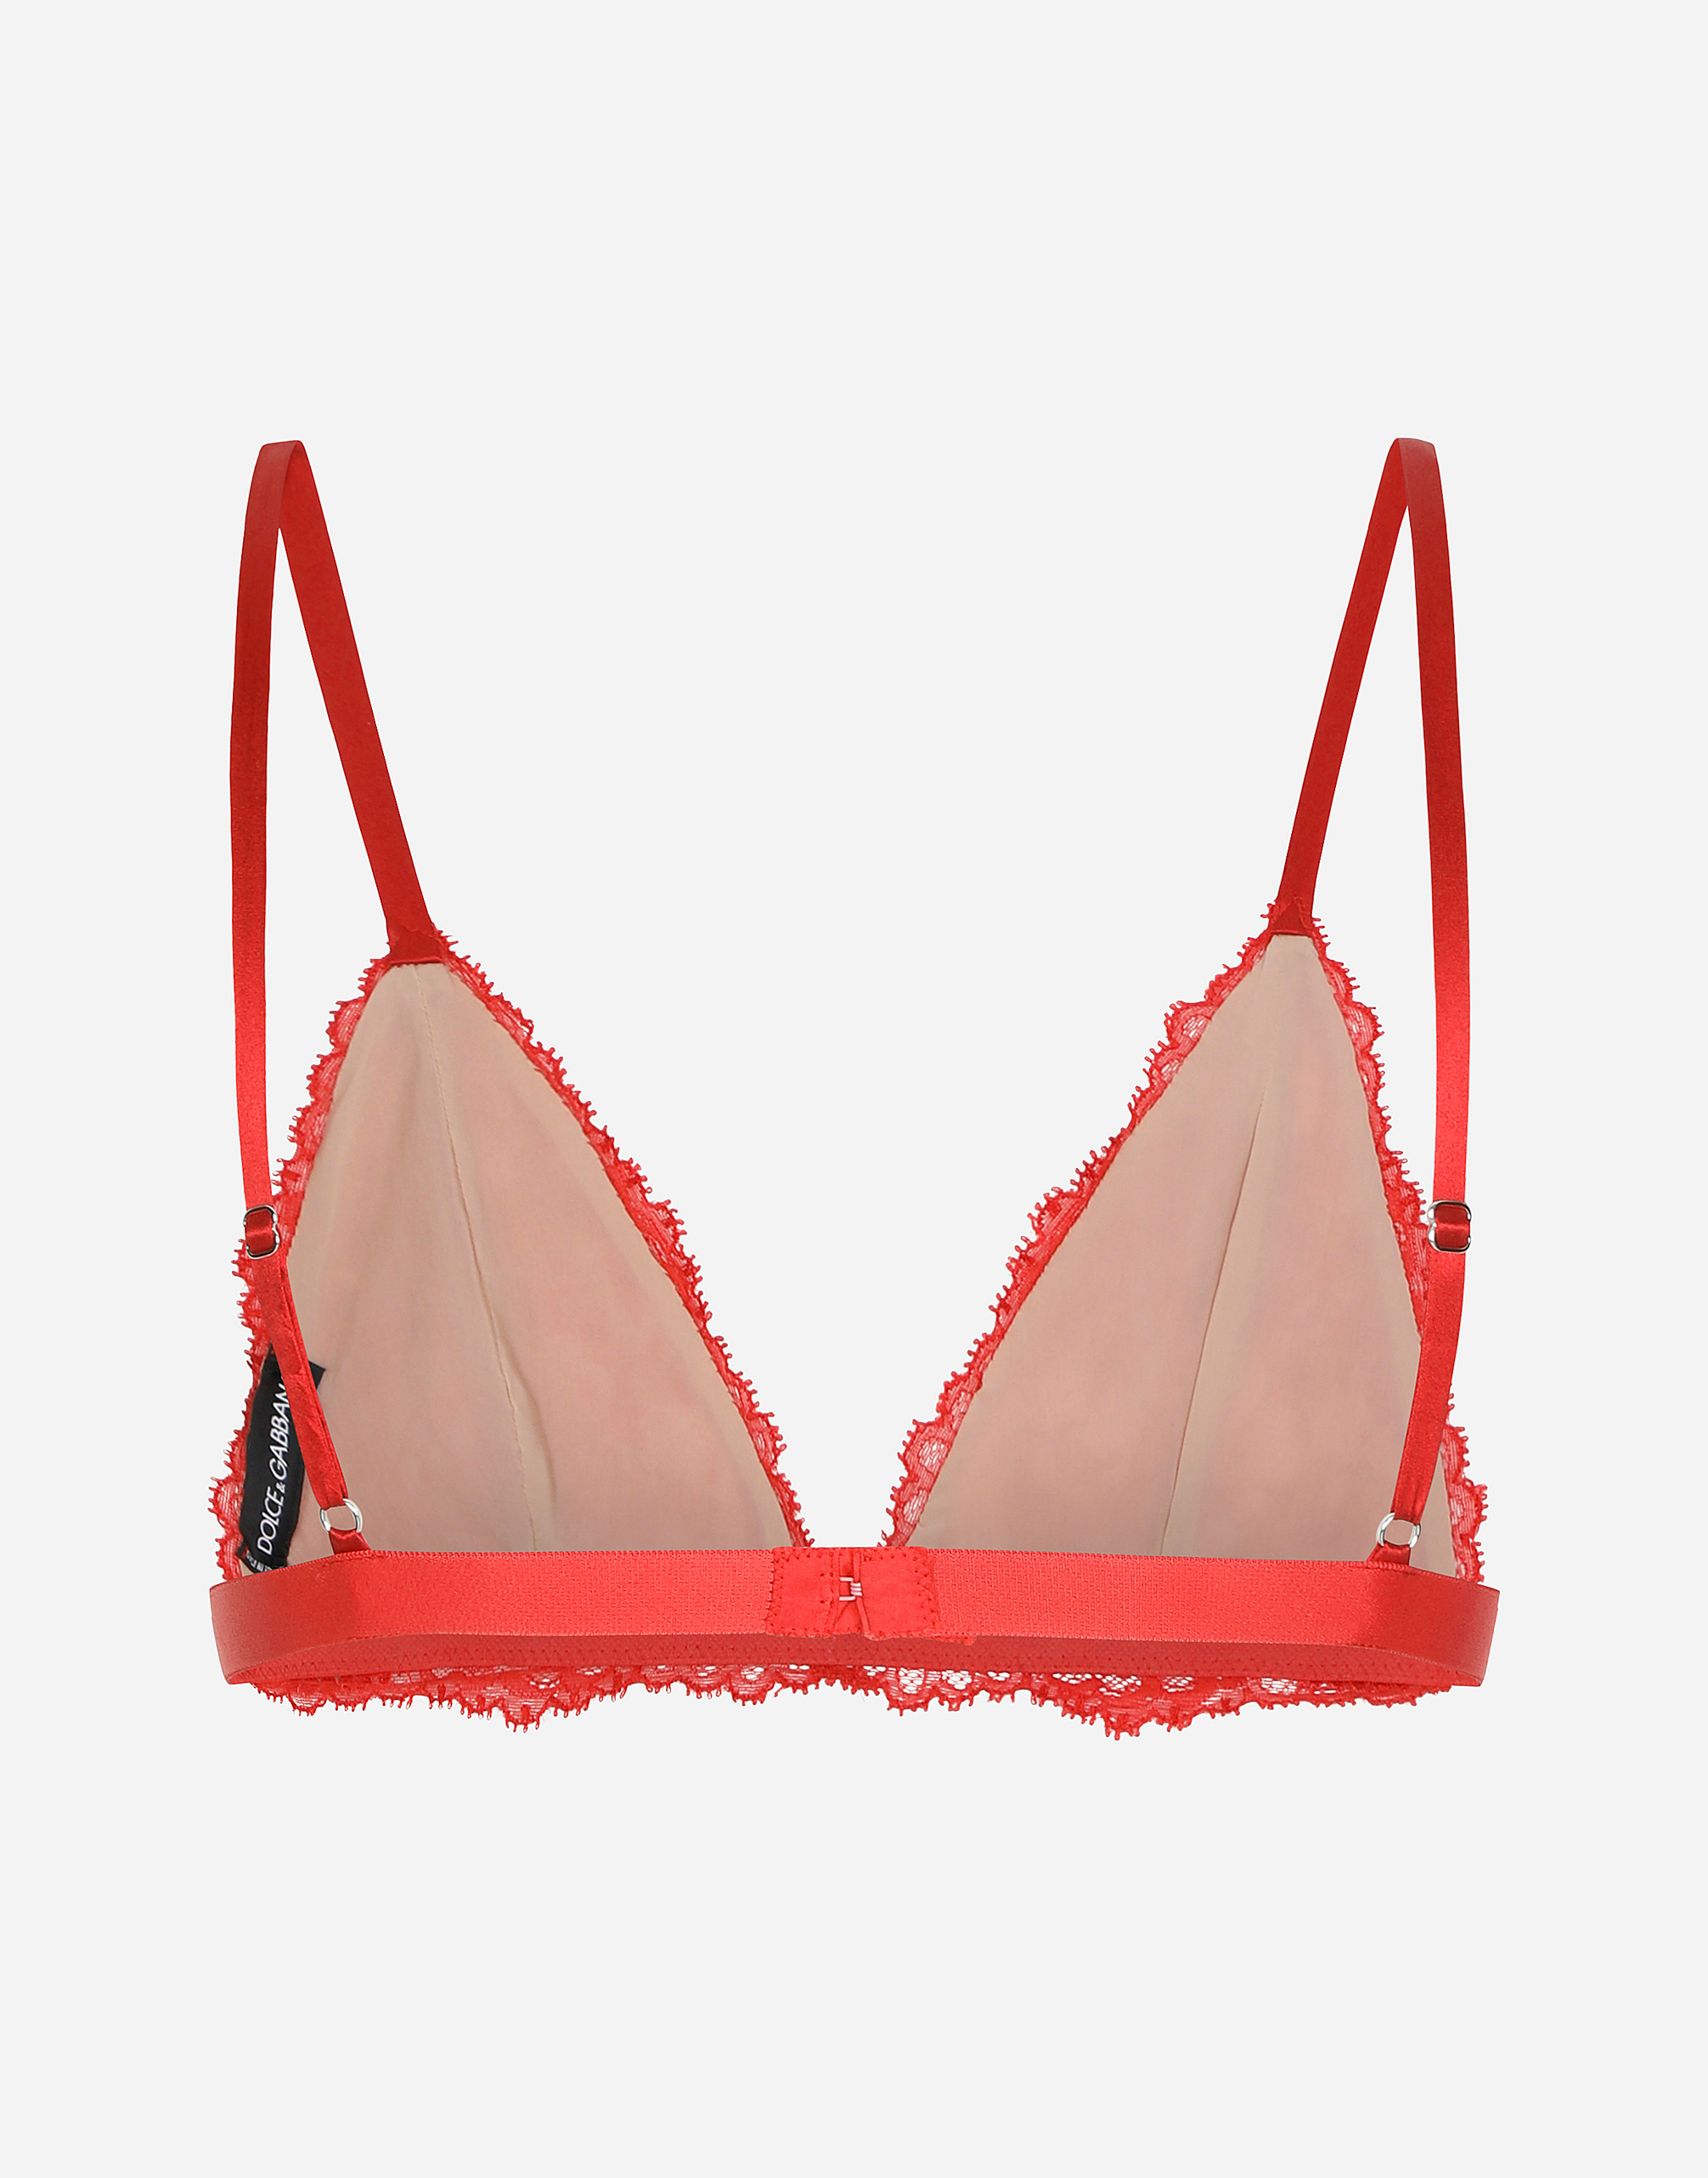 Lace bralette in red - Dolce Gabbana